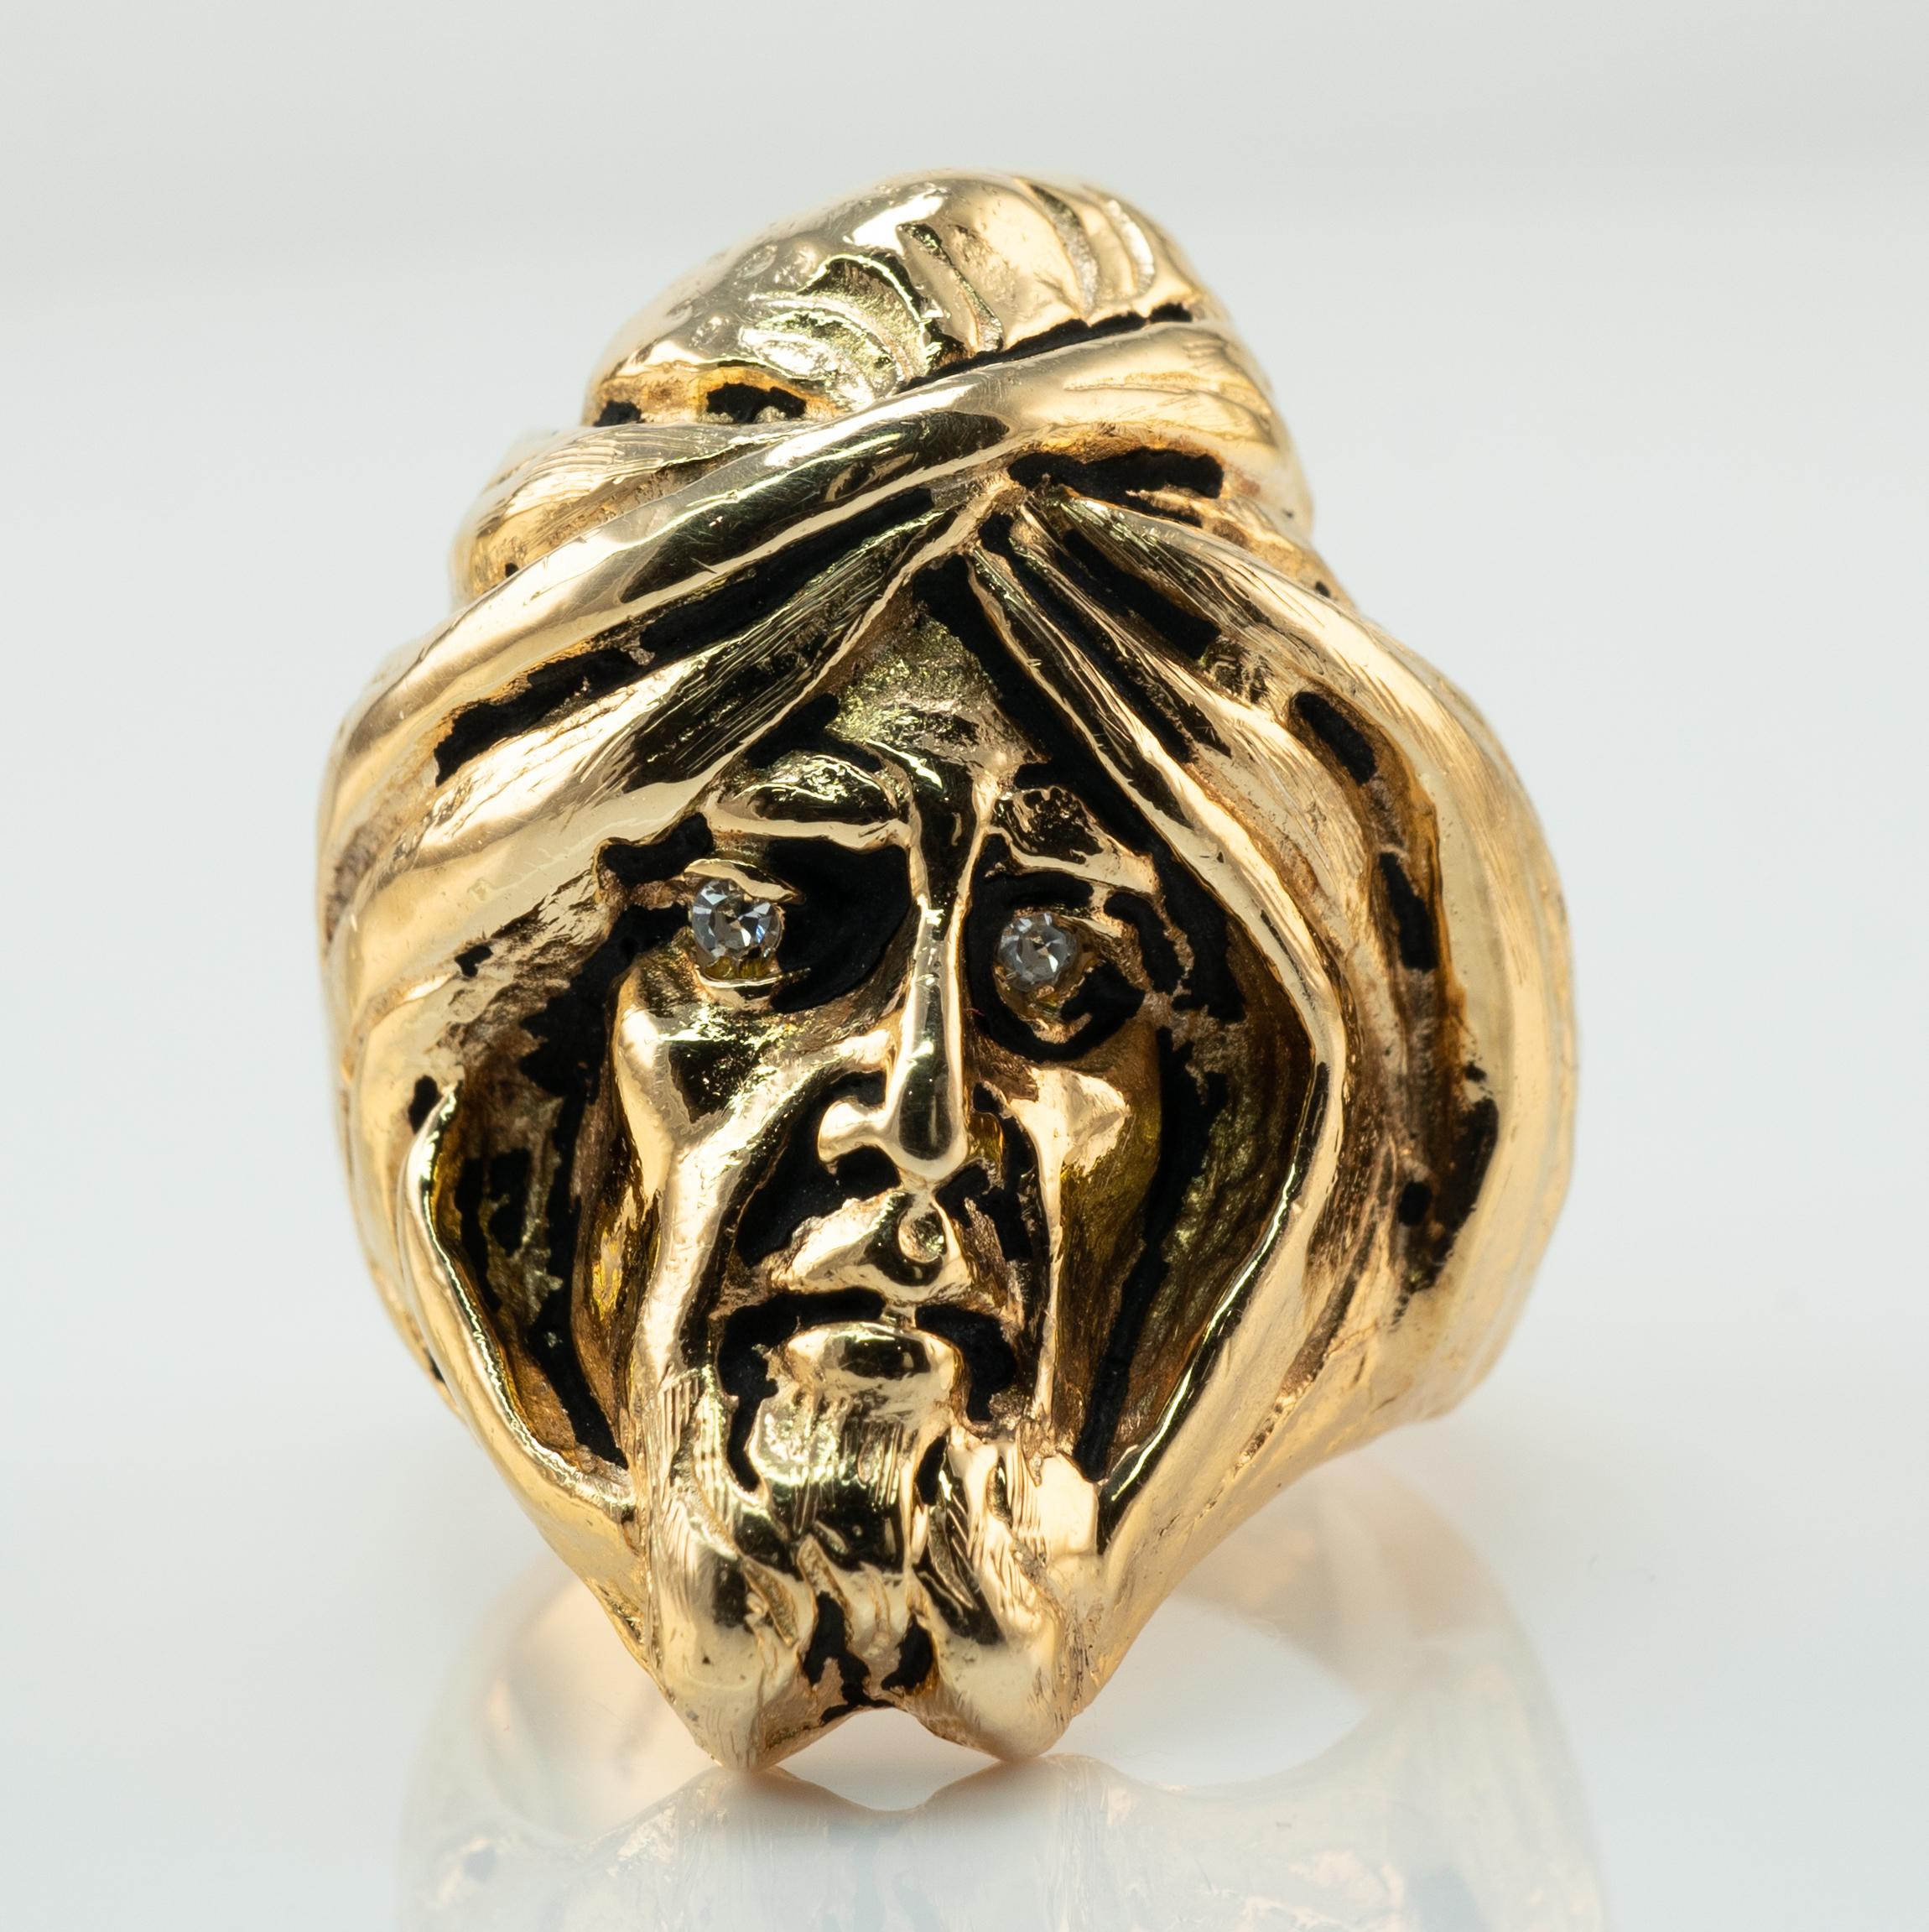 Diamond Ring Man Turban Head Face 14K Gold Vintage

This unique and one of a kind vintage ring is finely crafted in solid 14K Yellow gold and made in the shape of a man's face with a turban. The details of this piece are amazing, it is like a